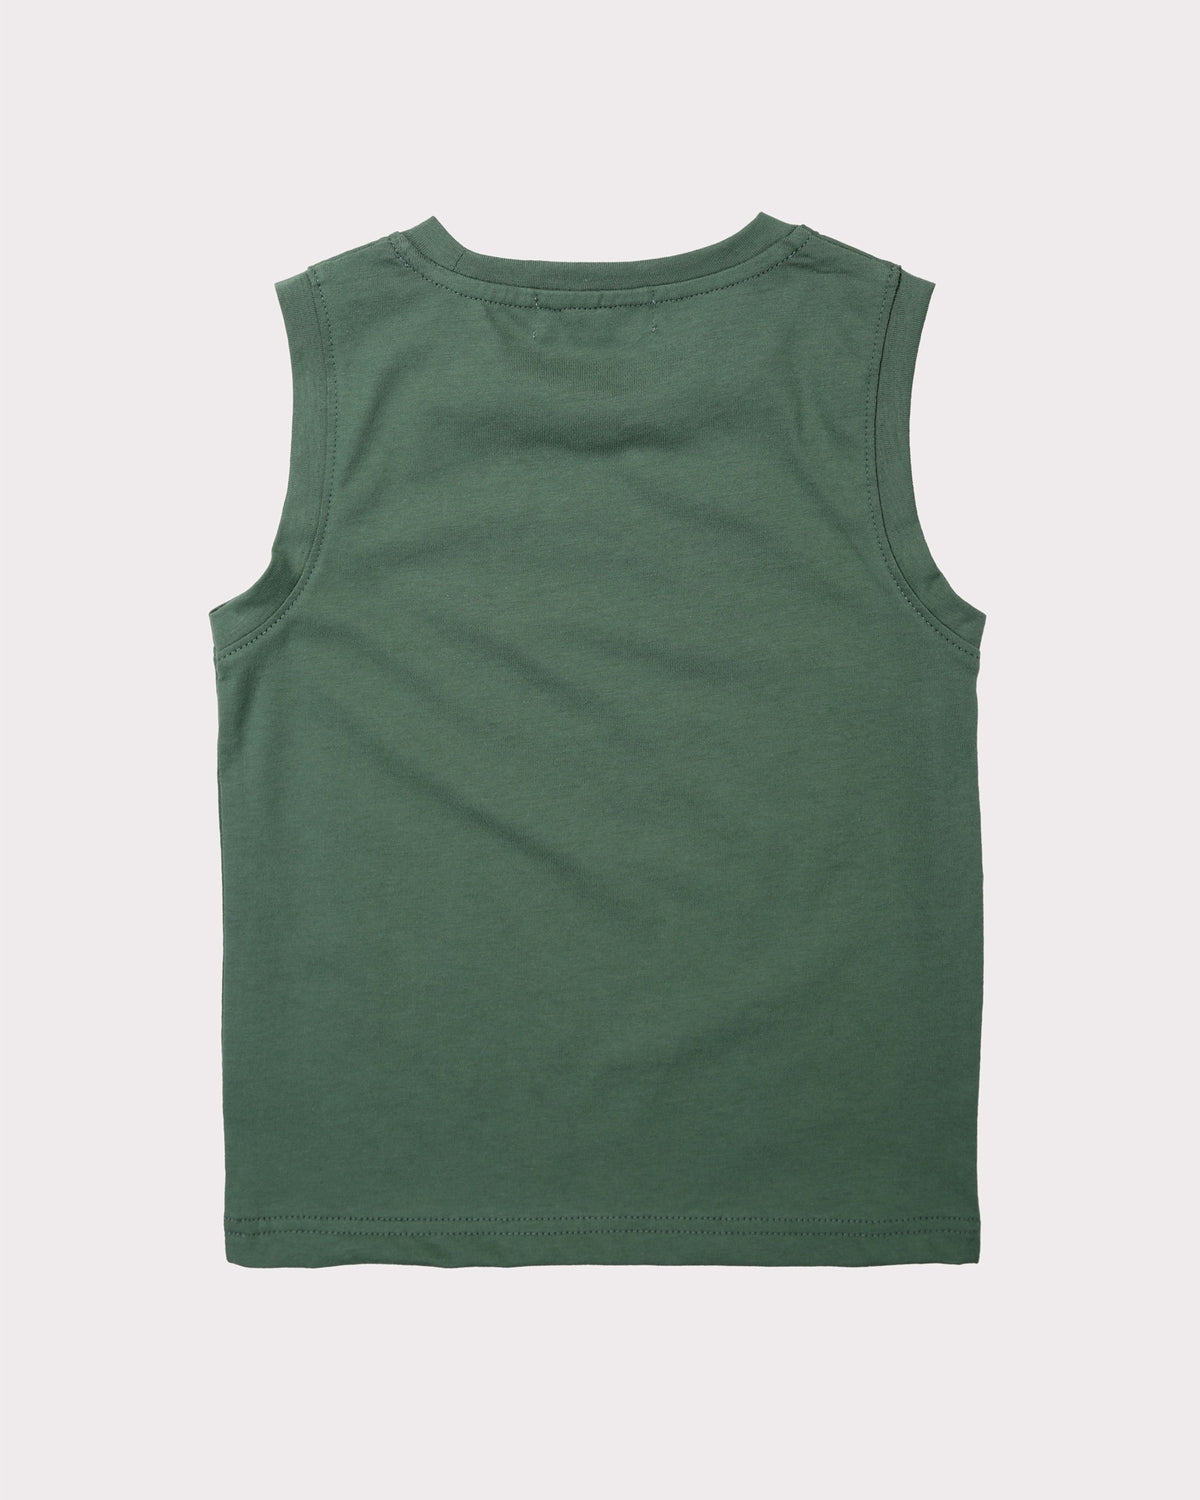 Leave The City Tank In Olive Back